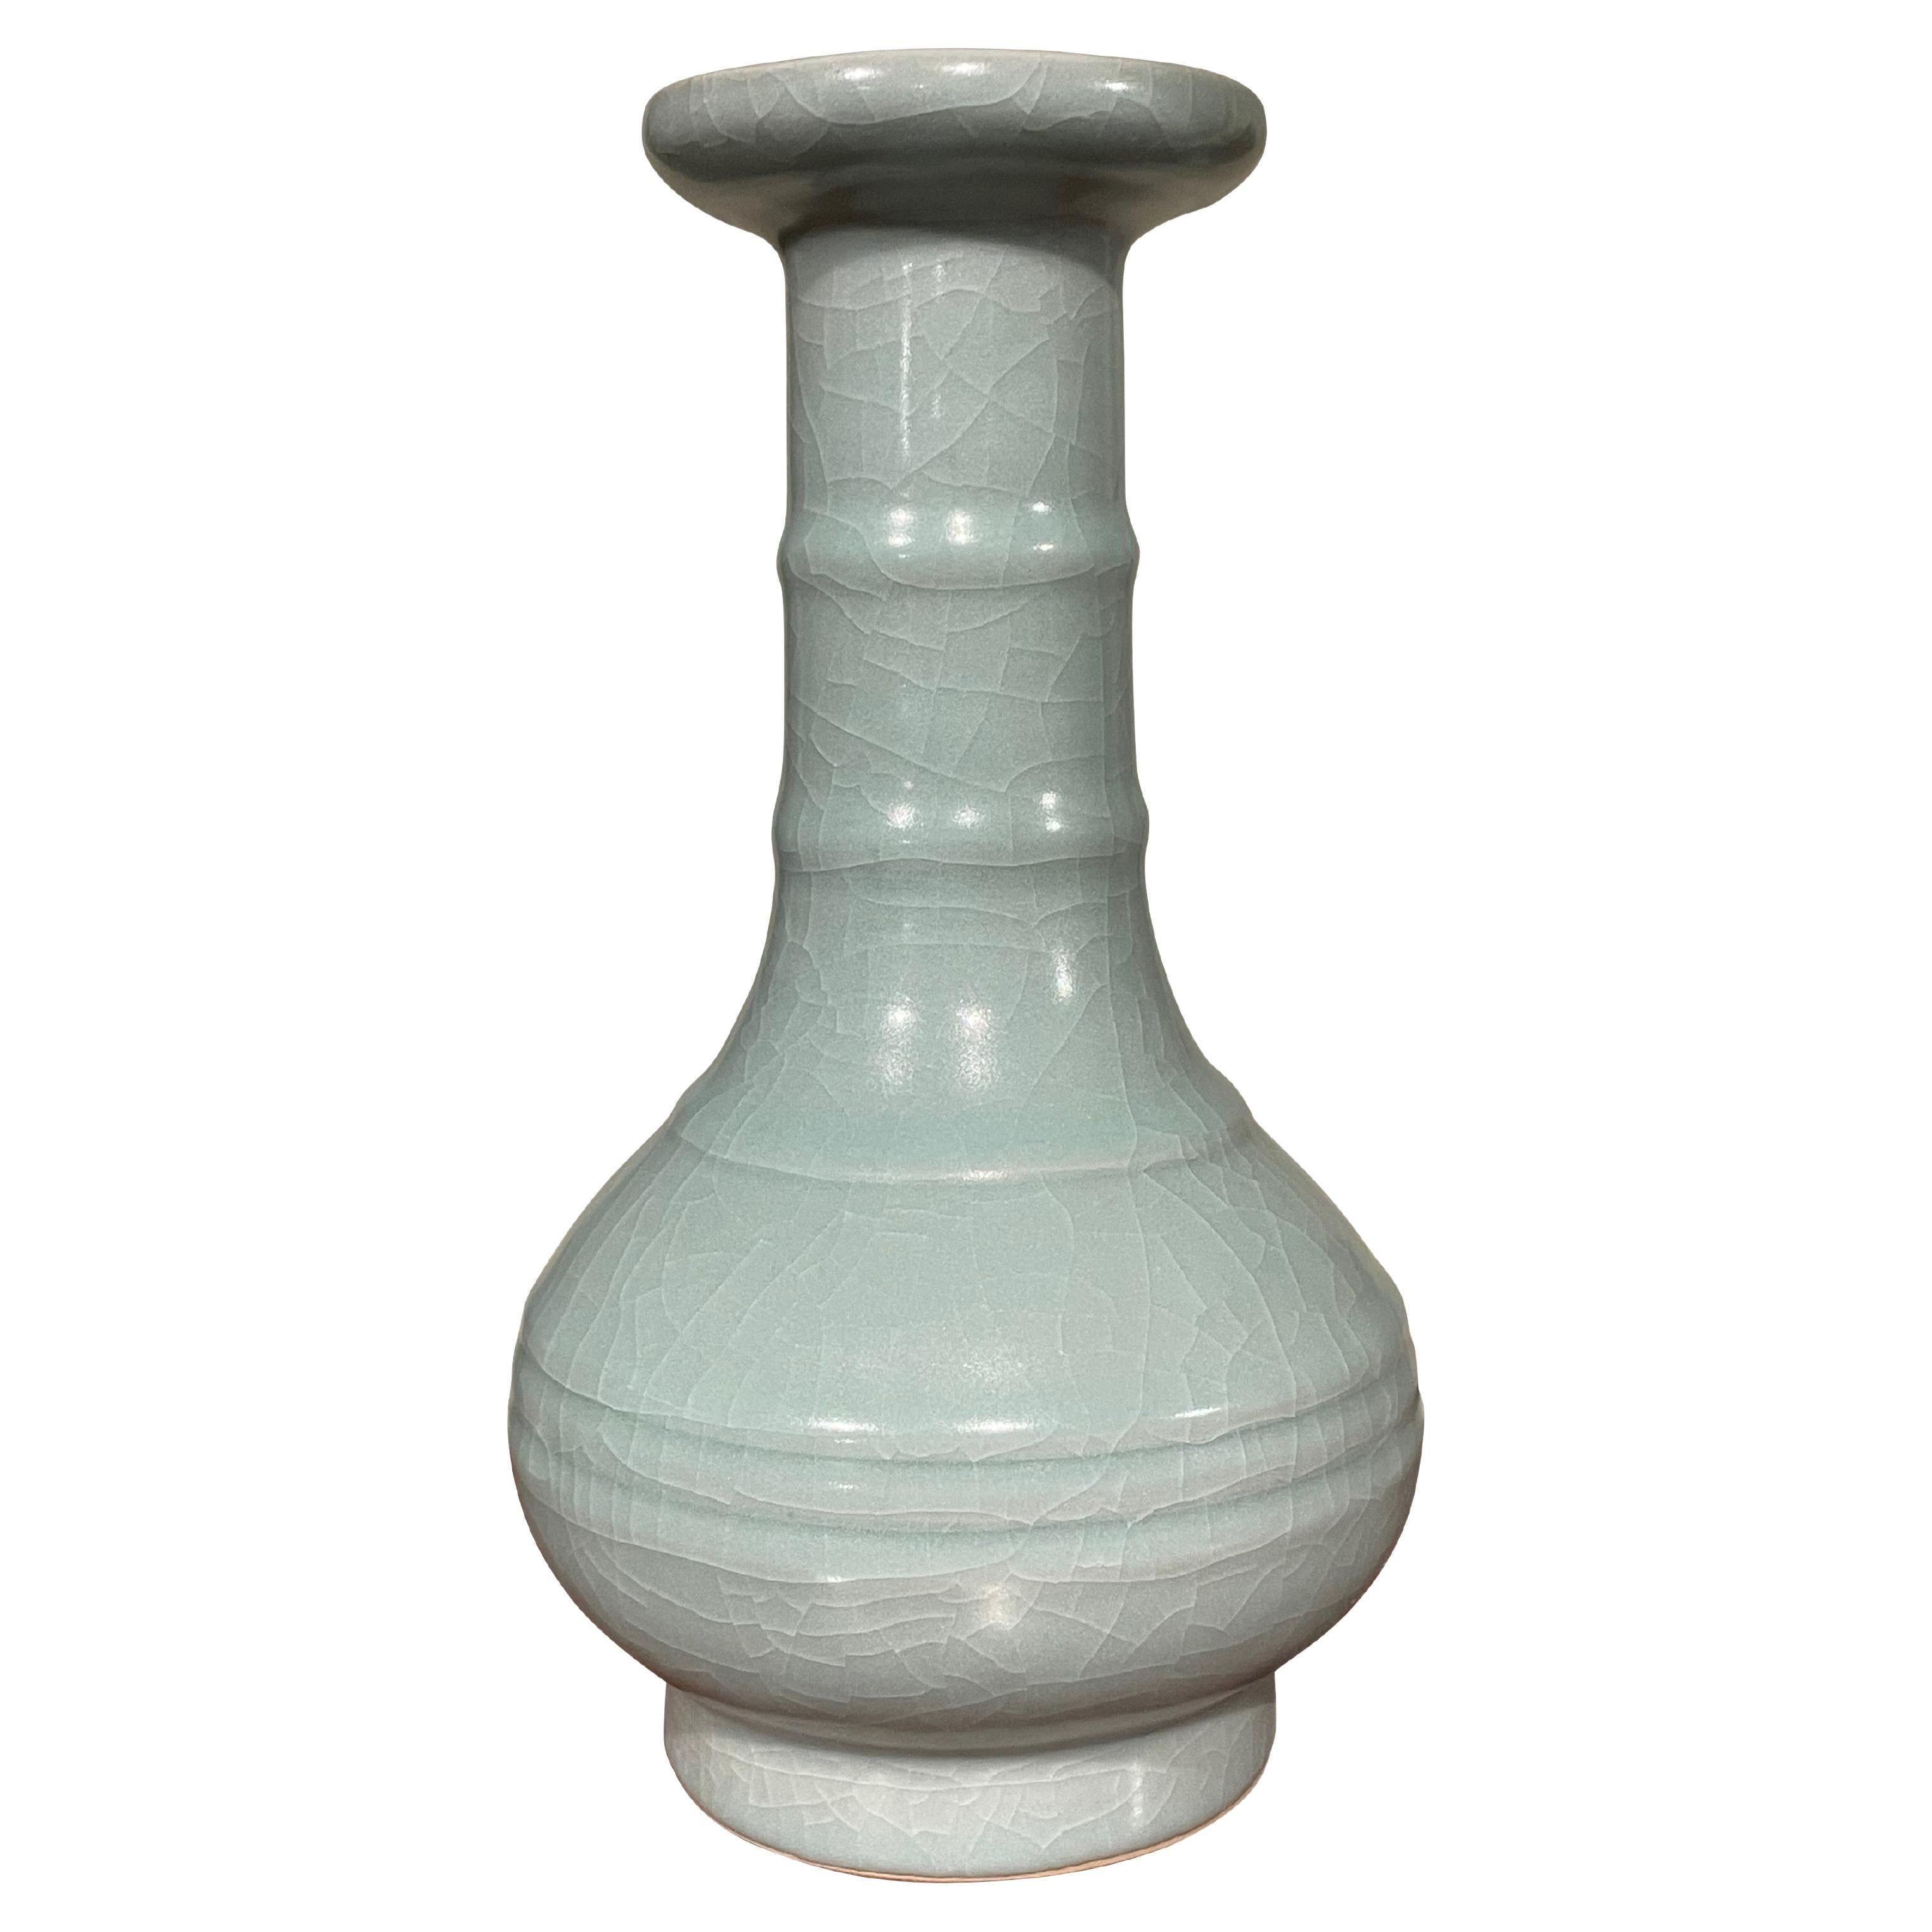 Pale Turquoise Tall Neck With Horizontal Rib Details Vase, China, Contemporary